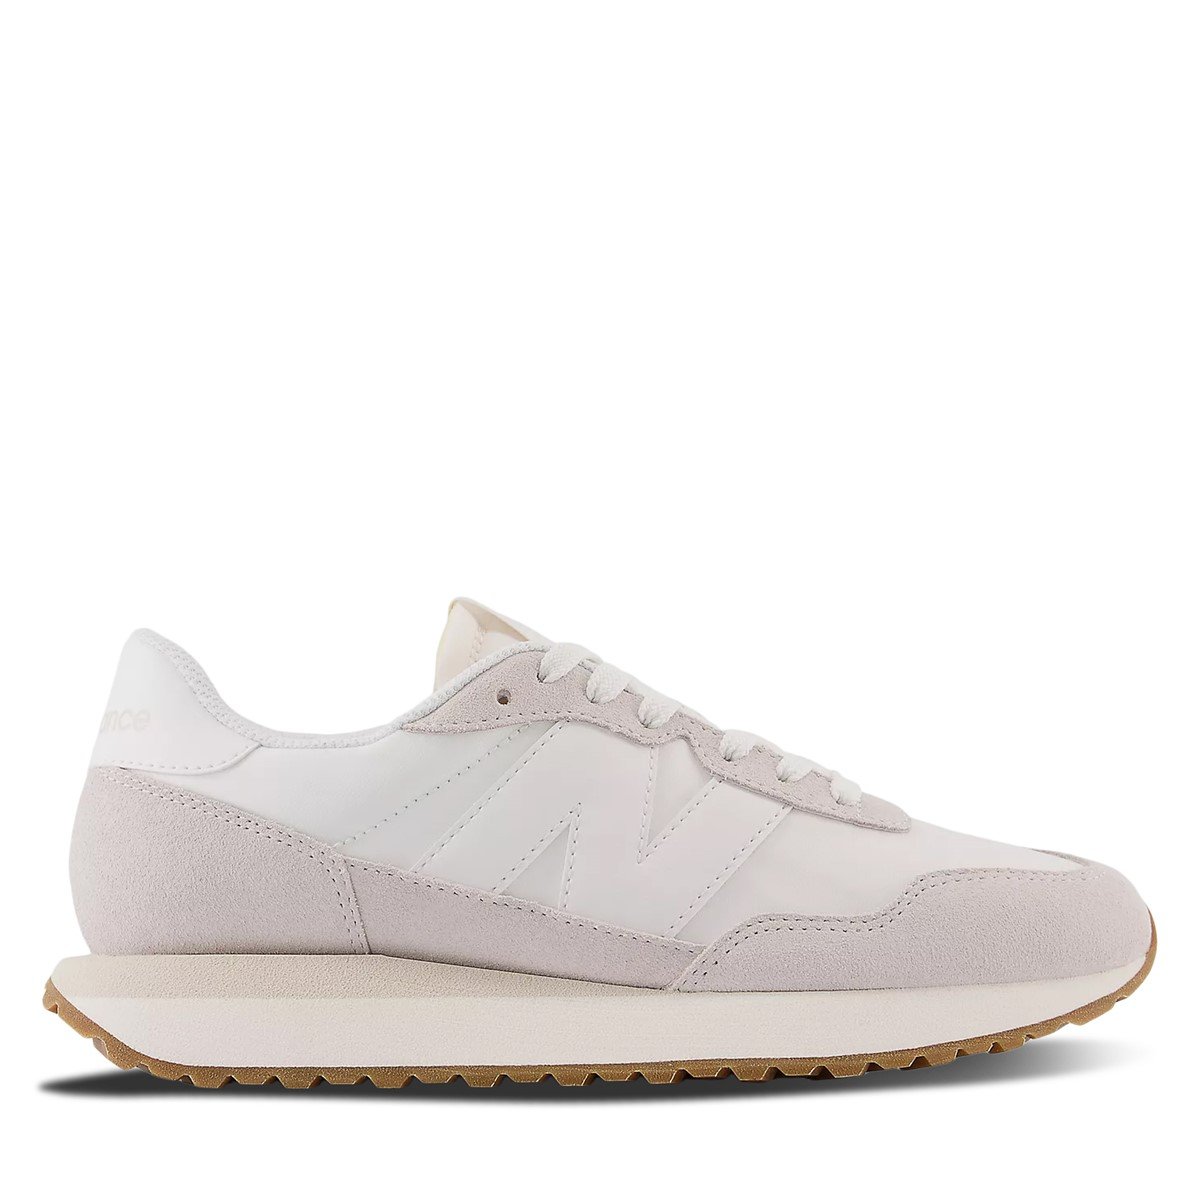 Women's 237 Sneakers in Lilac/Taupe